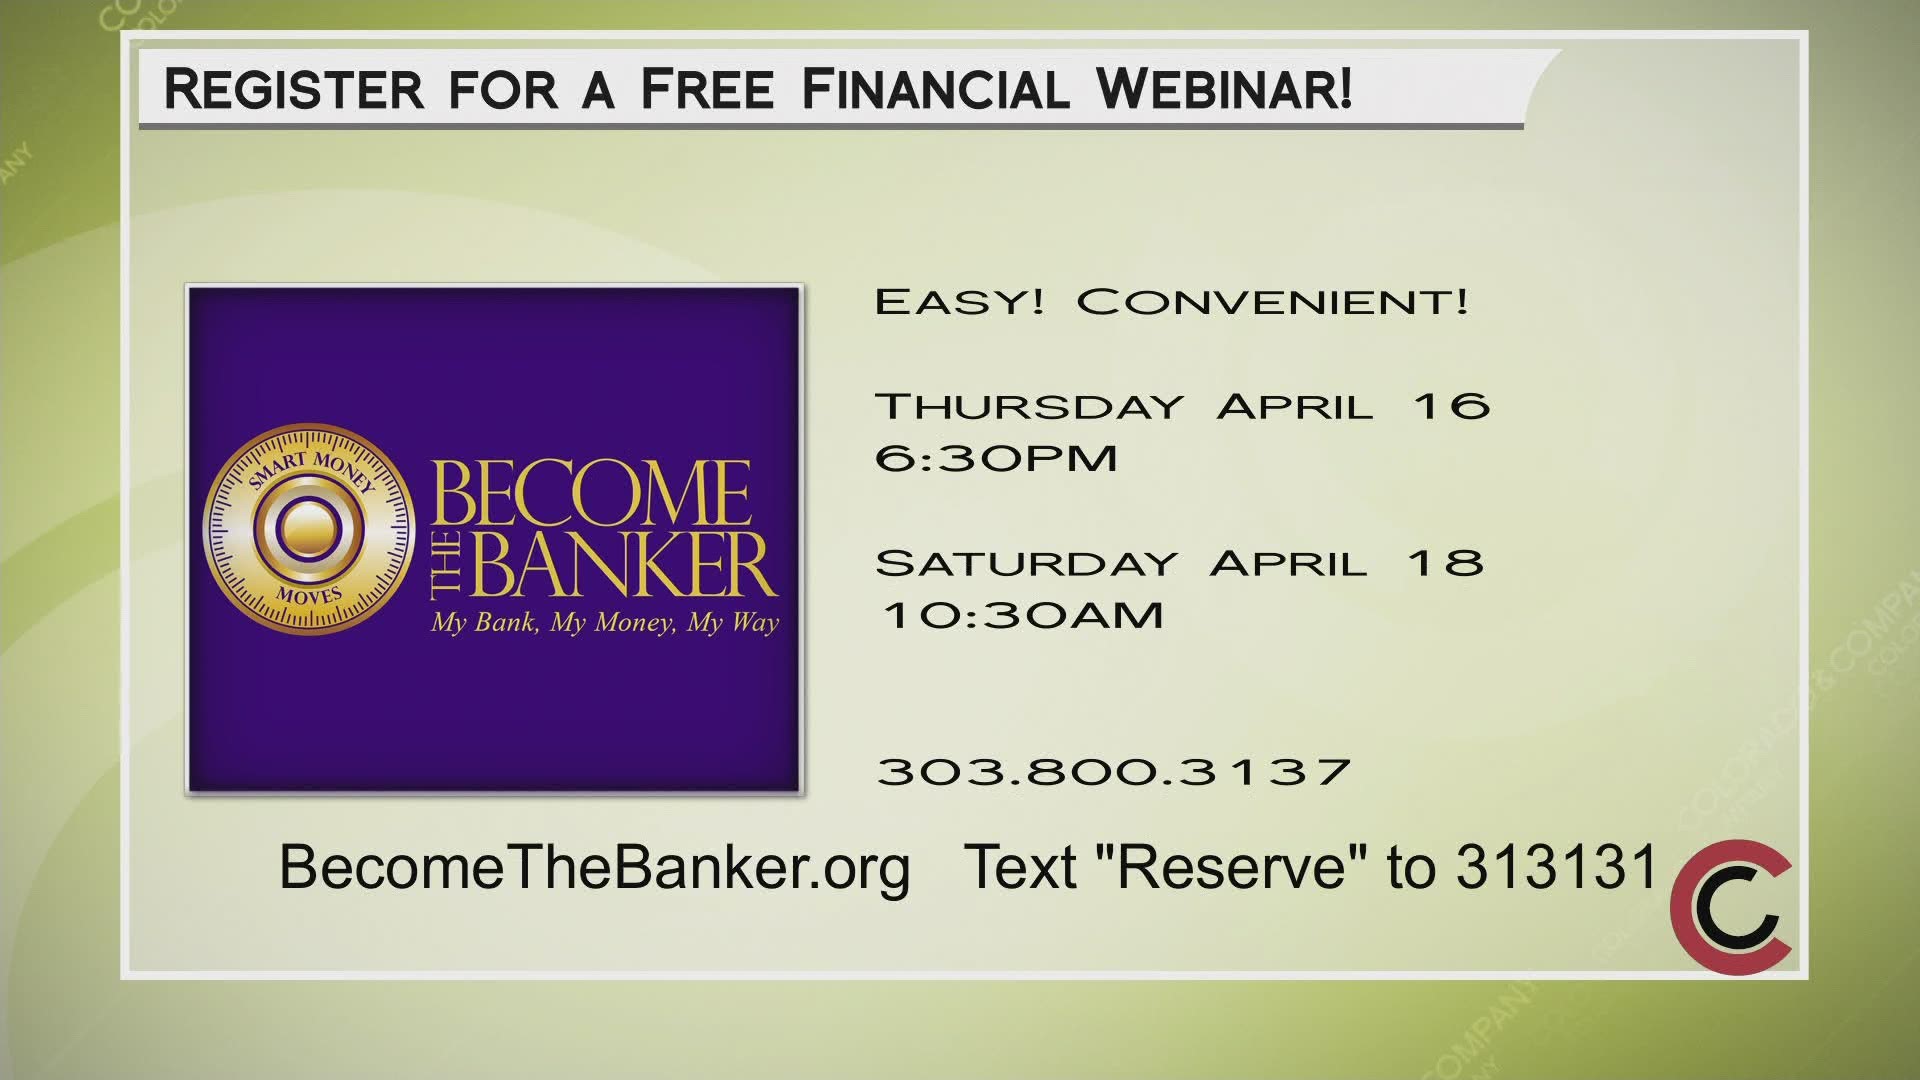 Check out a Become the Banker webinar on either April 16th or 18th. You can call 303.800.3137 or visit BecomeTheBanker.org/Register for more information.